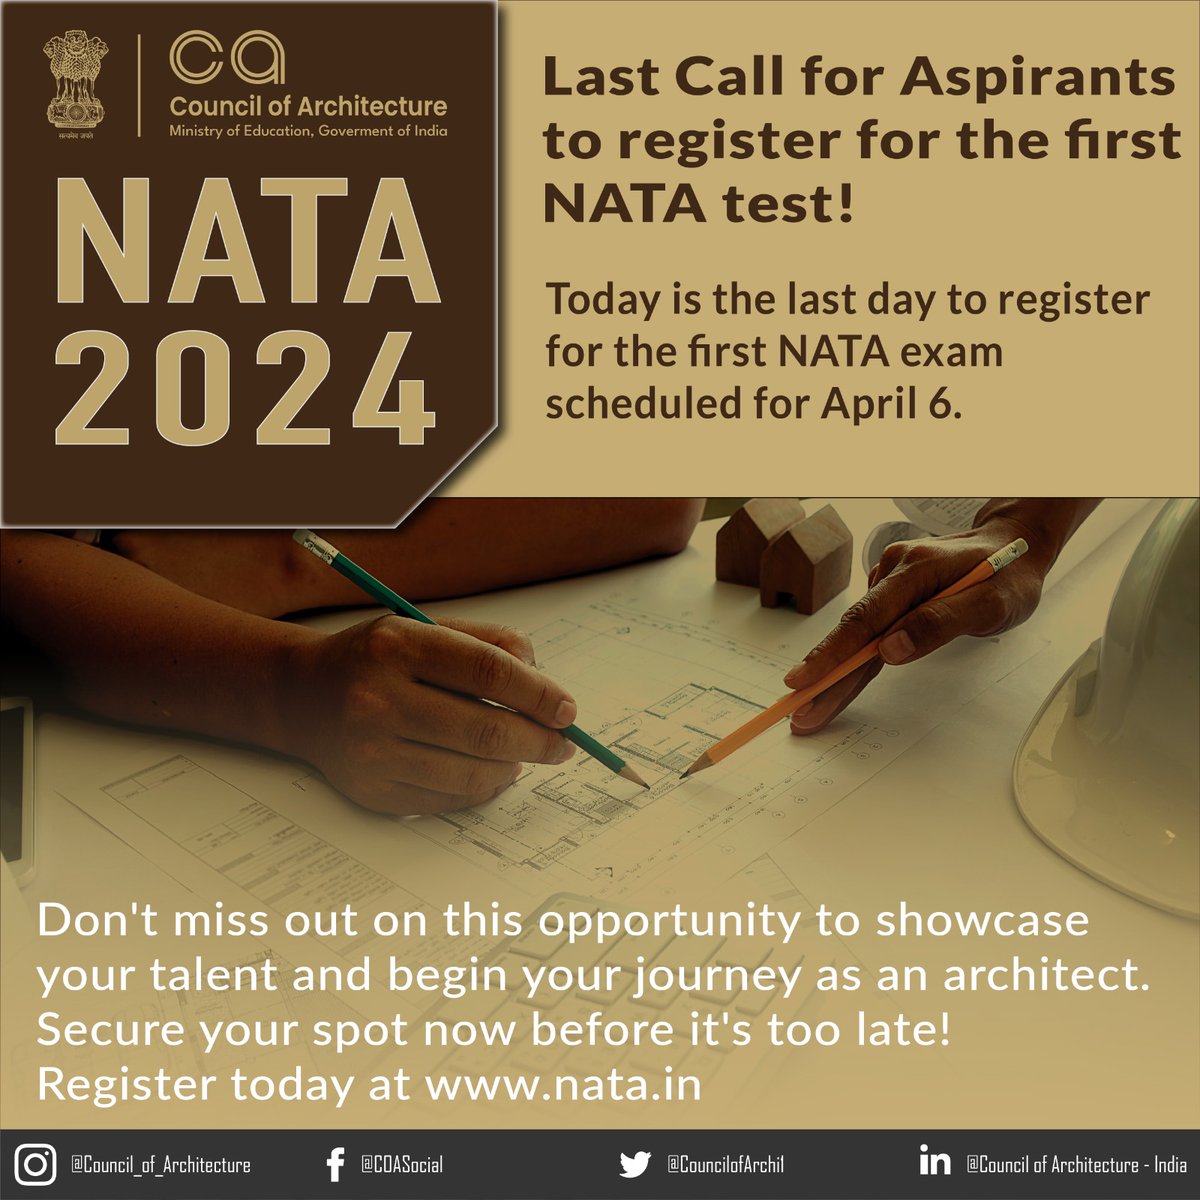 Don't miss your chance! Today is the final call for aspiring architects to register for the first NATA test on April 6th. 

Secure your spot now and take the first step towards your dream career! 

#NATA2024 #NATA #councilofarchitecture #dreamcareer #aspiringarchitects